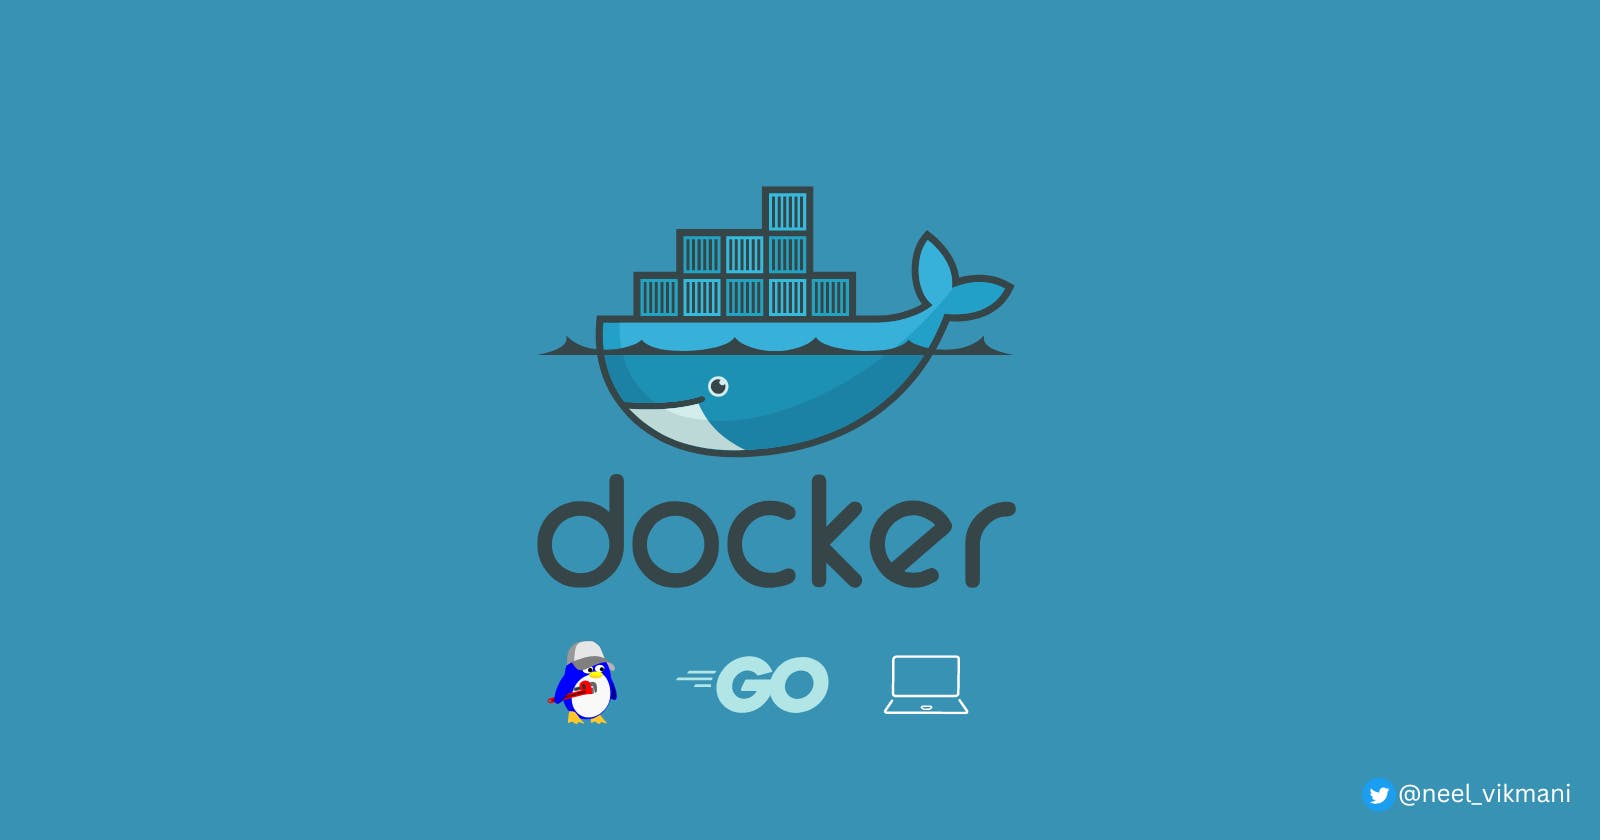 Basics of Docker: Why, What and How